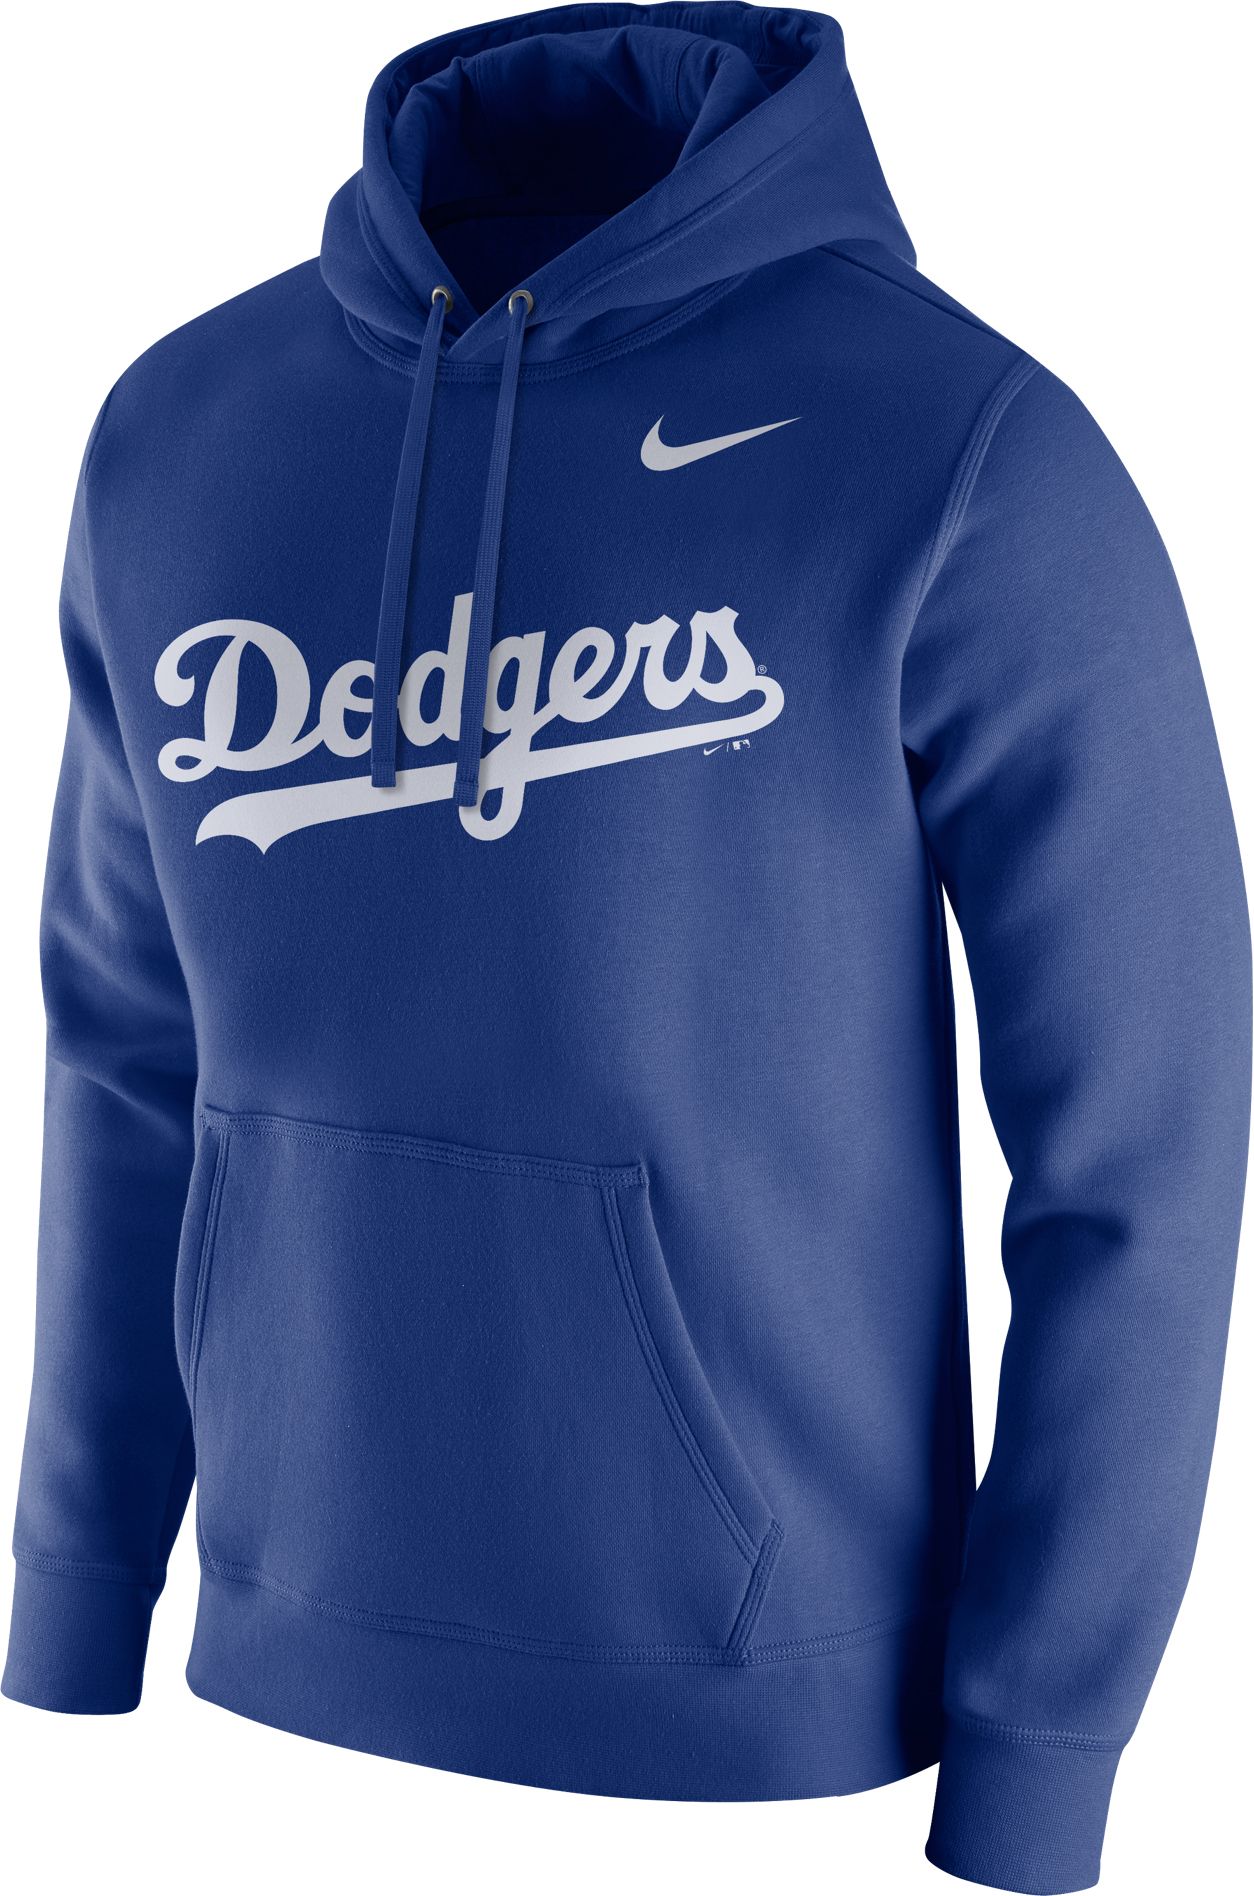 Los Angeles Dodgers Apparel & Gear | DICK'S Sporting Goods